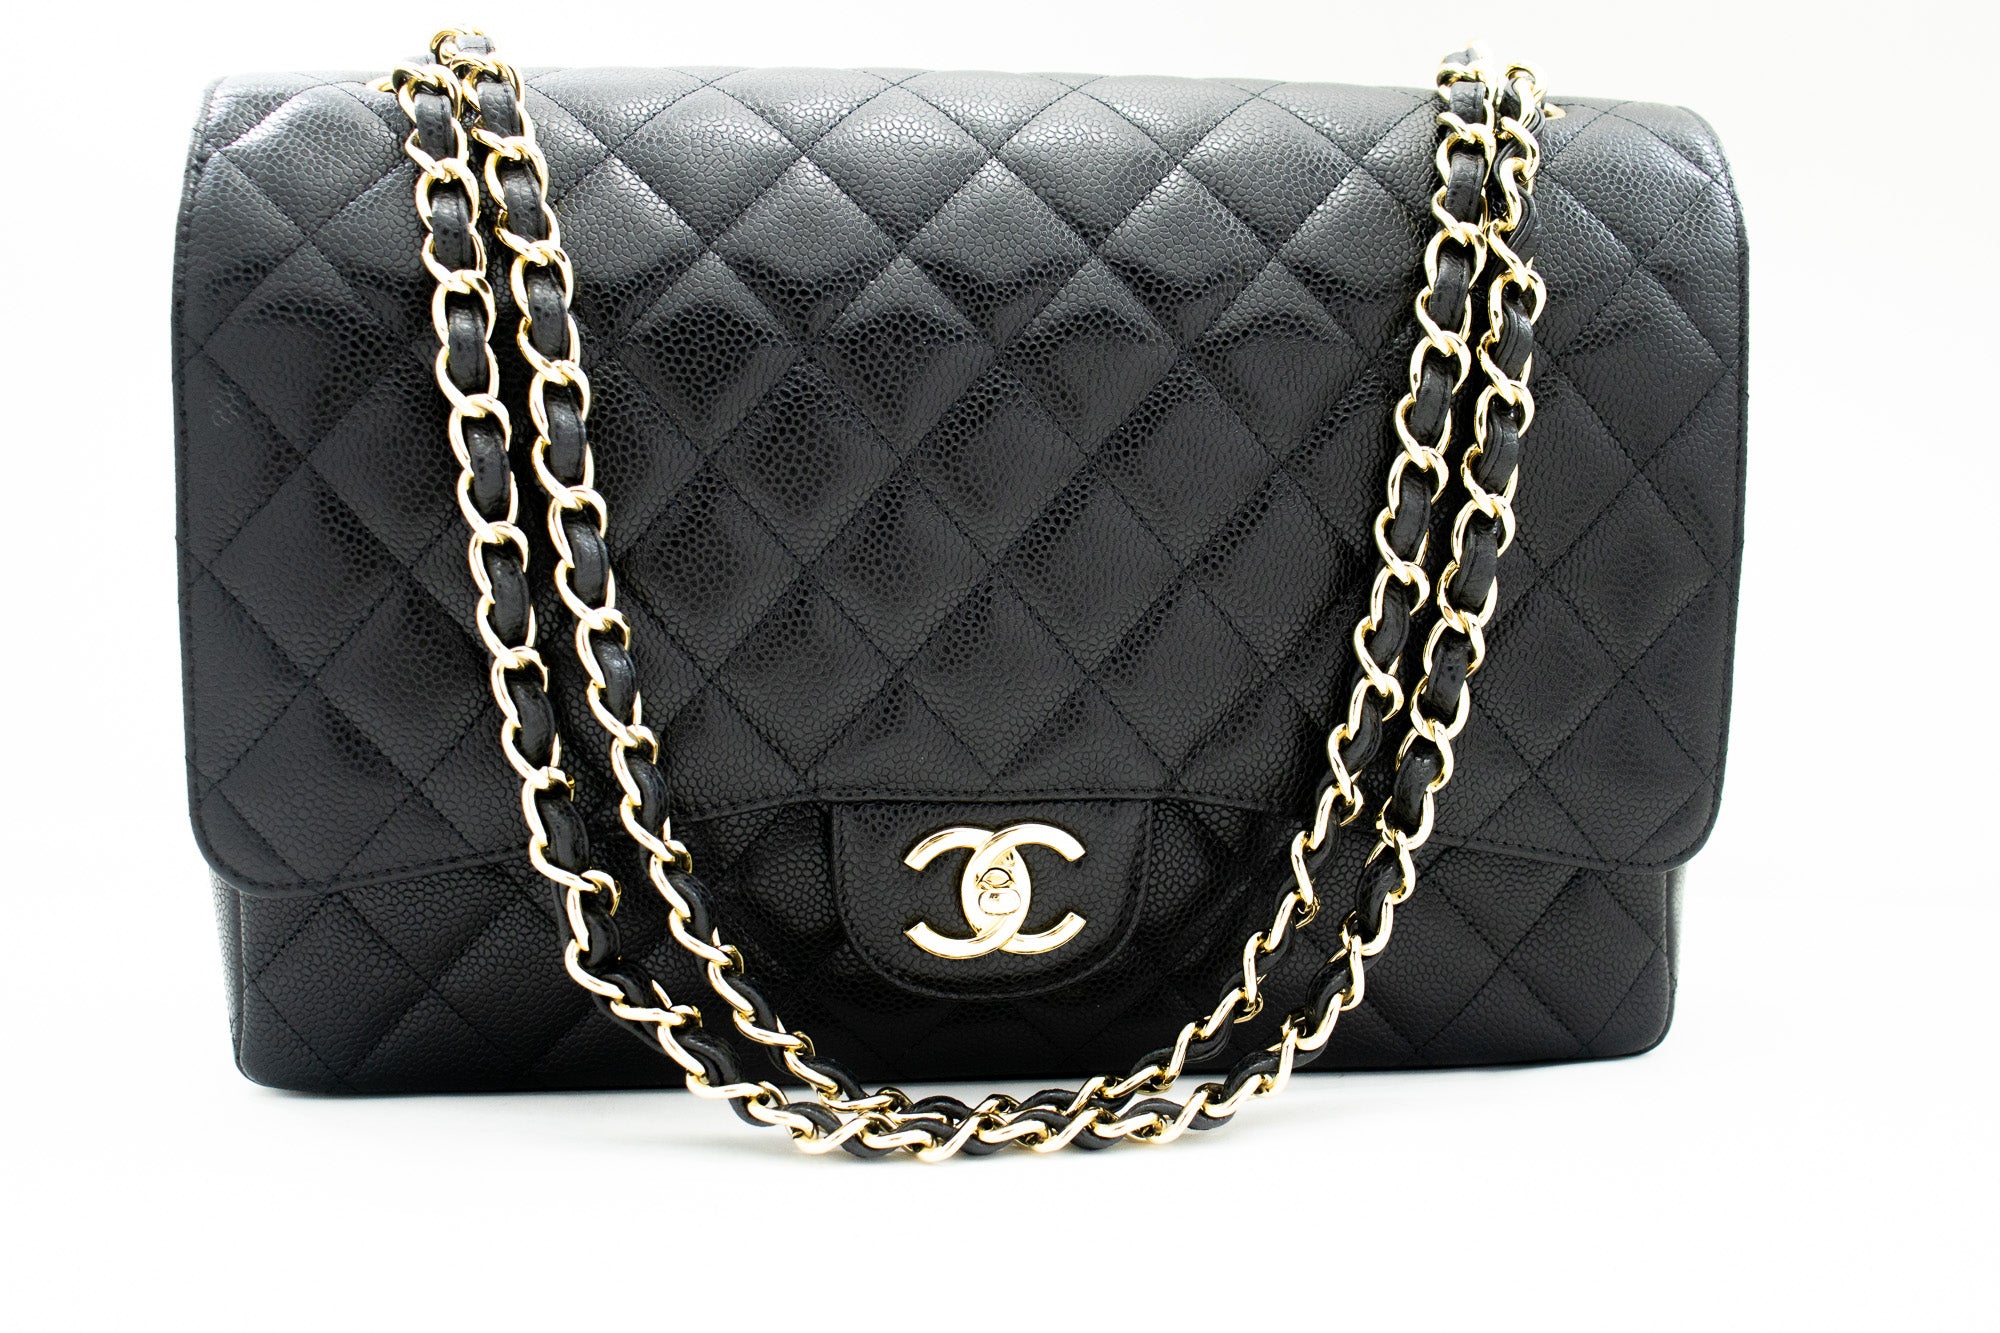 CHANEL Wallet on Chain Grained Calfskin Leather Shoulder Crossbody